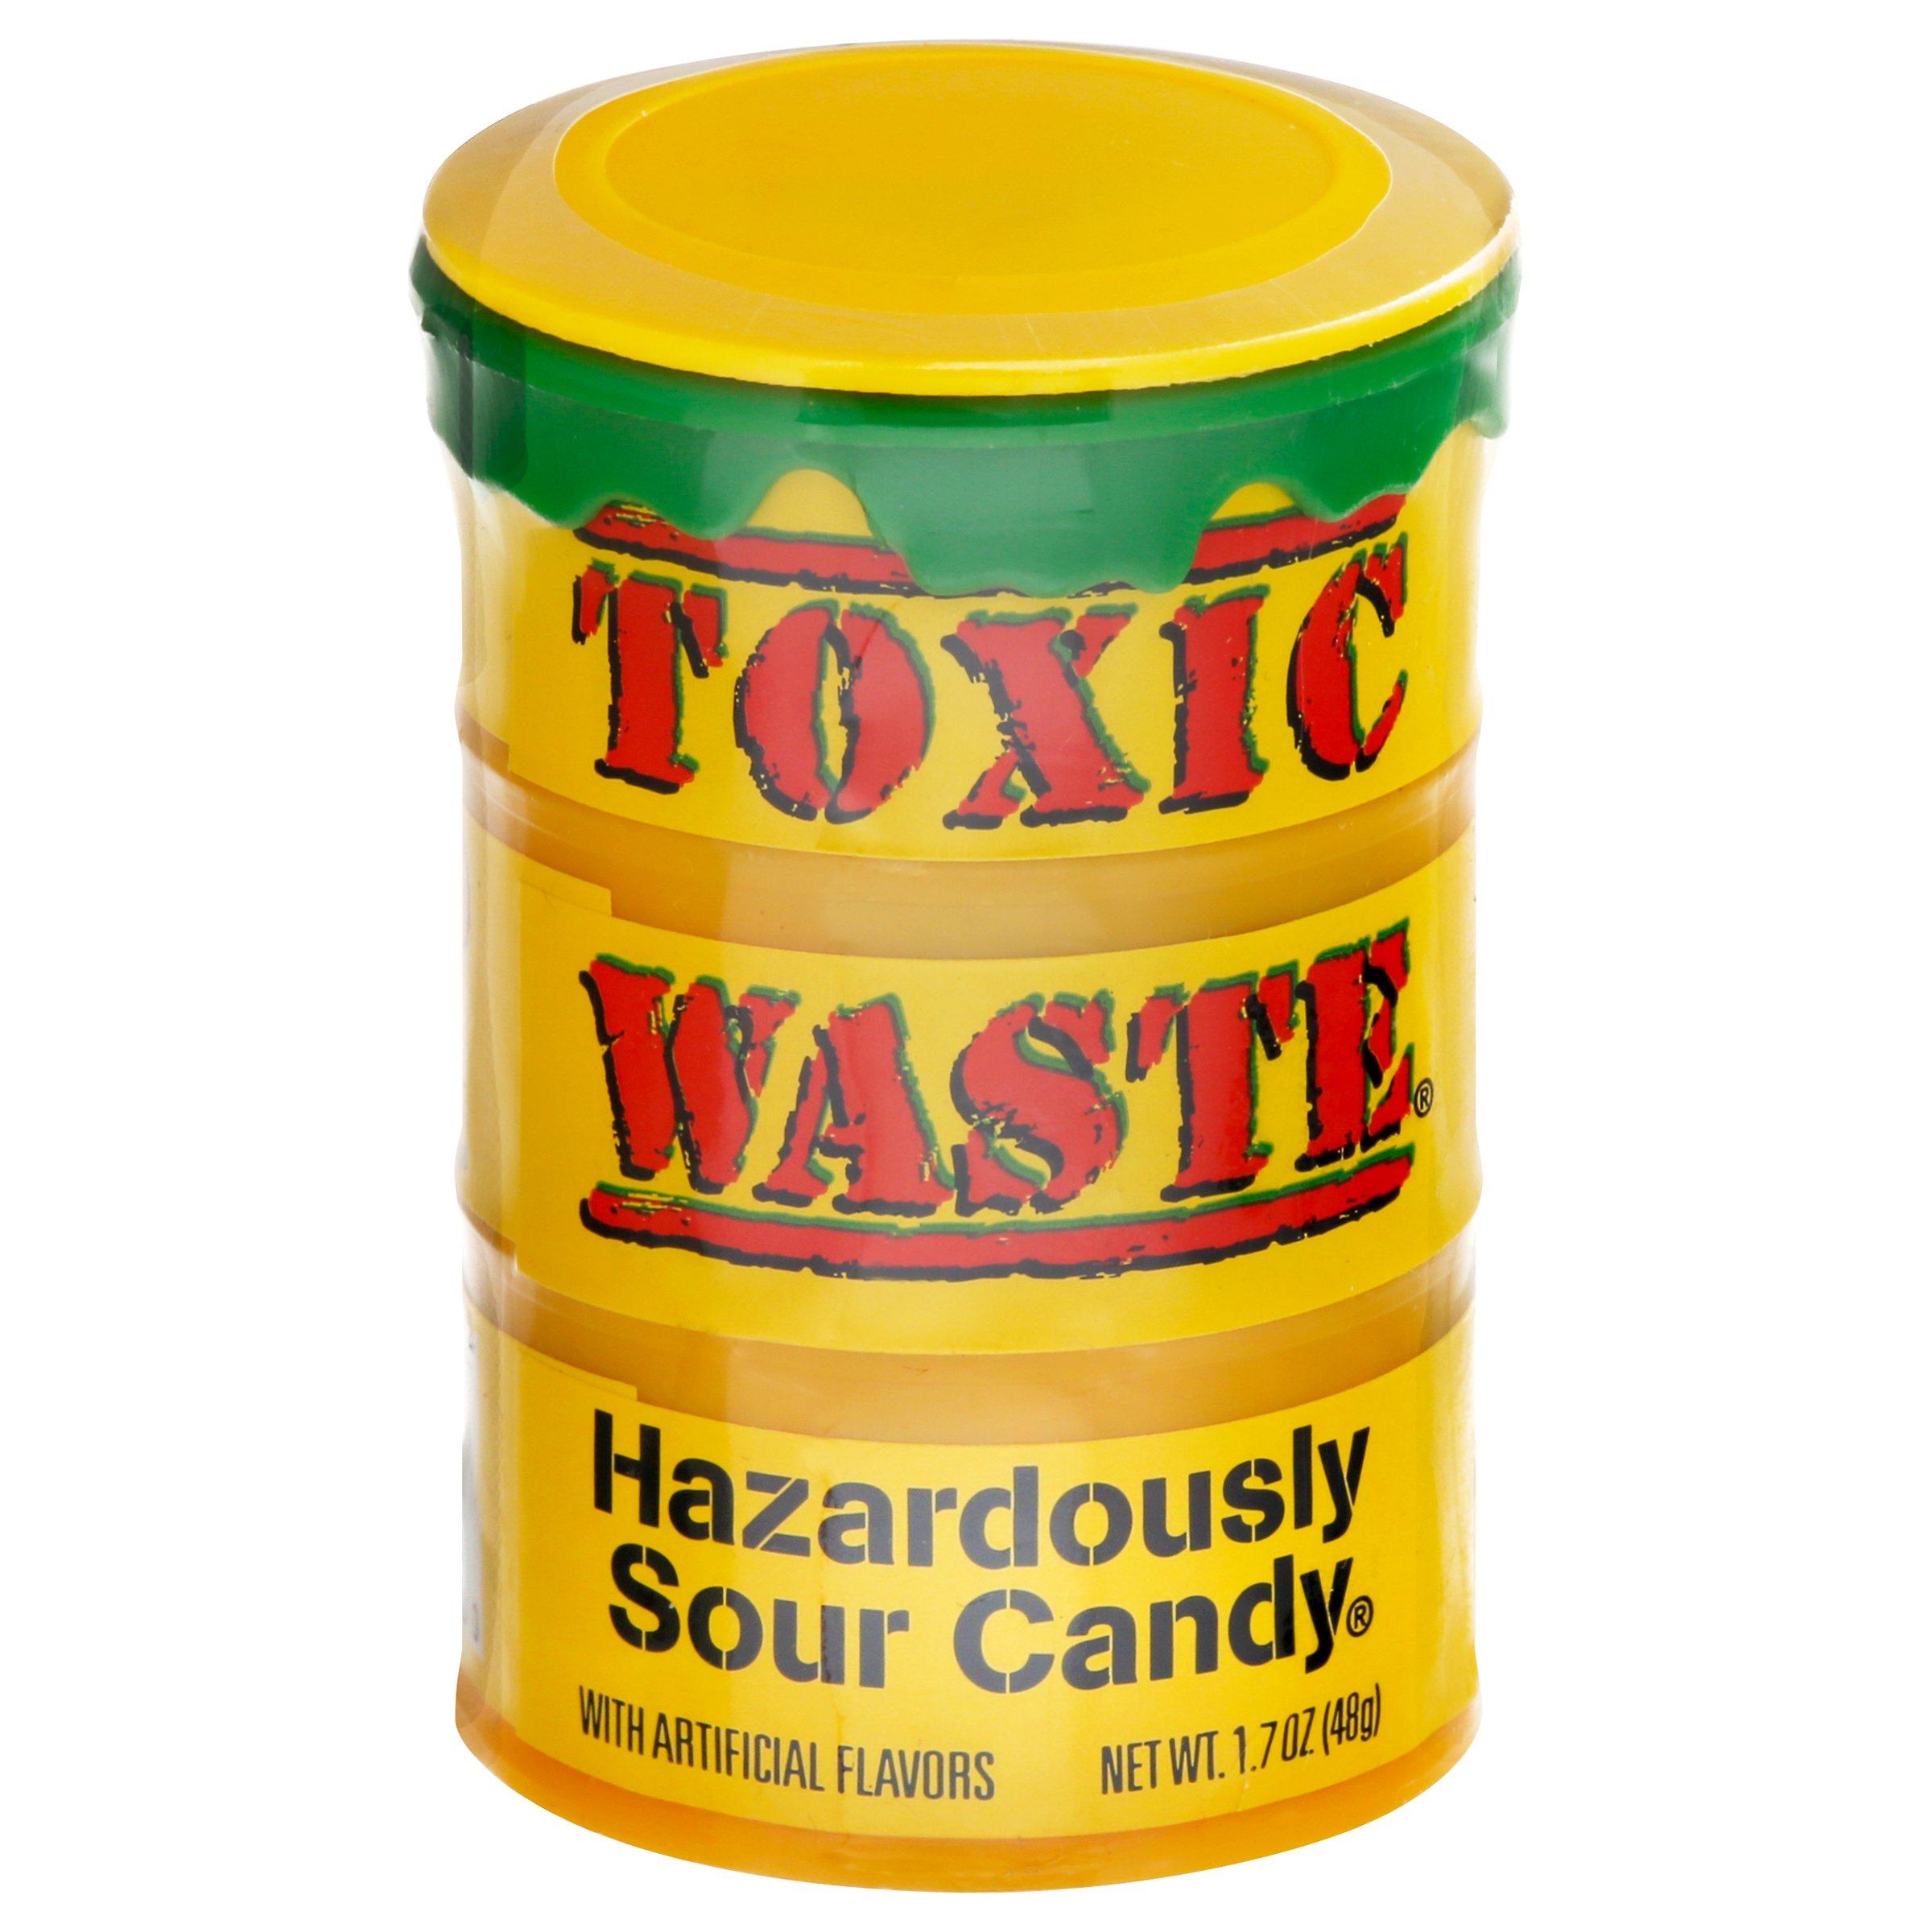 Toxic Waste Sour Candy Yellow Drum